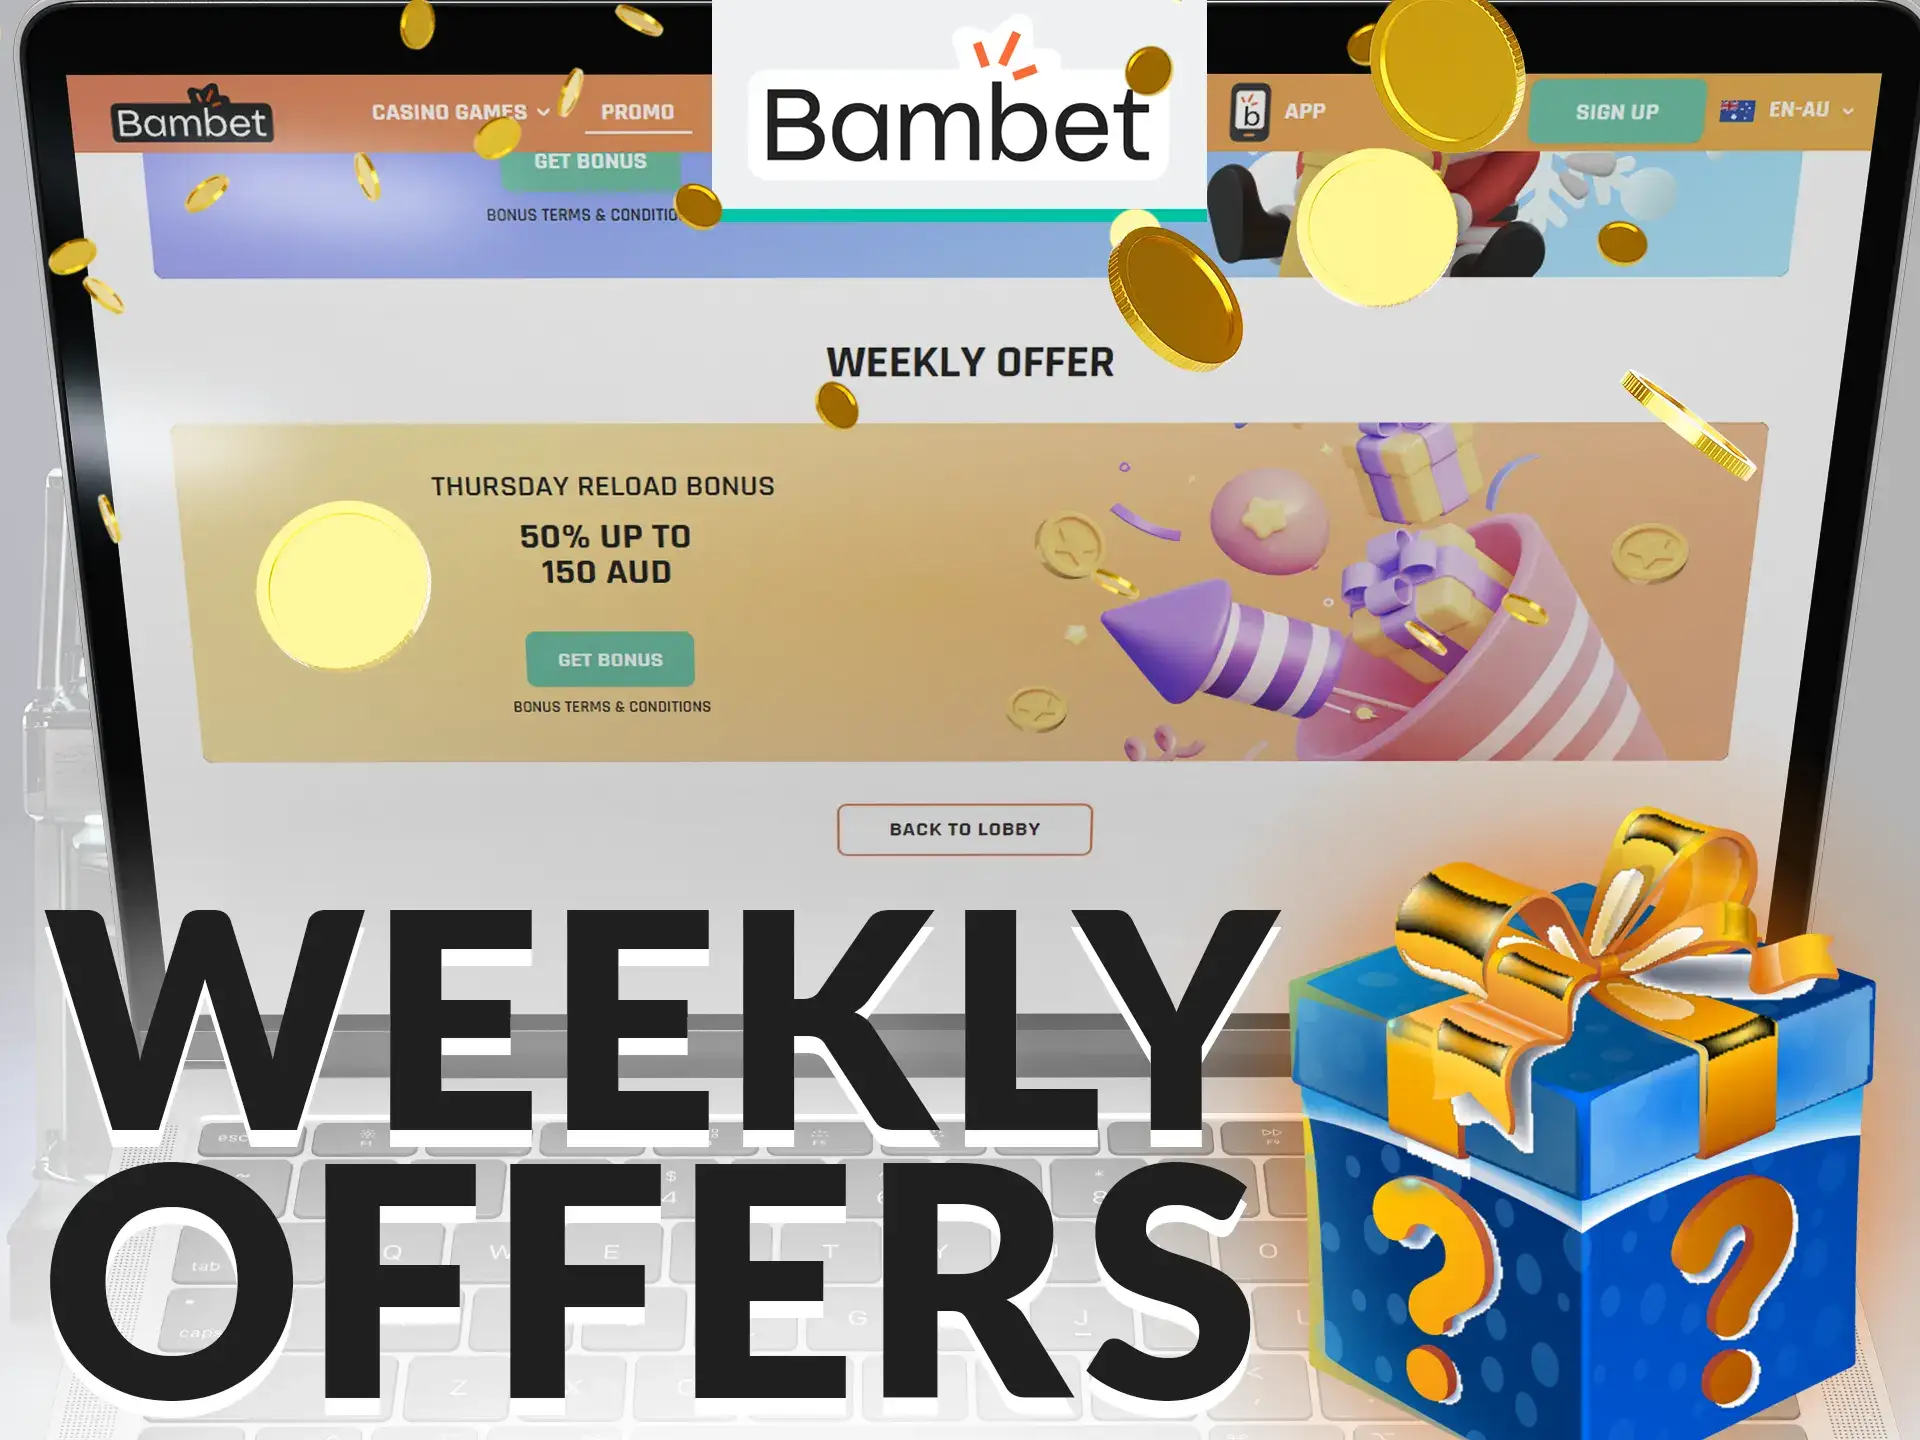 Bambet rewards new and regular players with weekly offers.